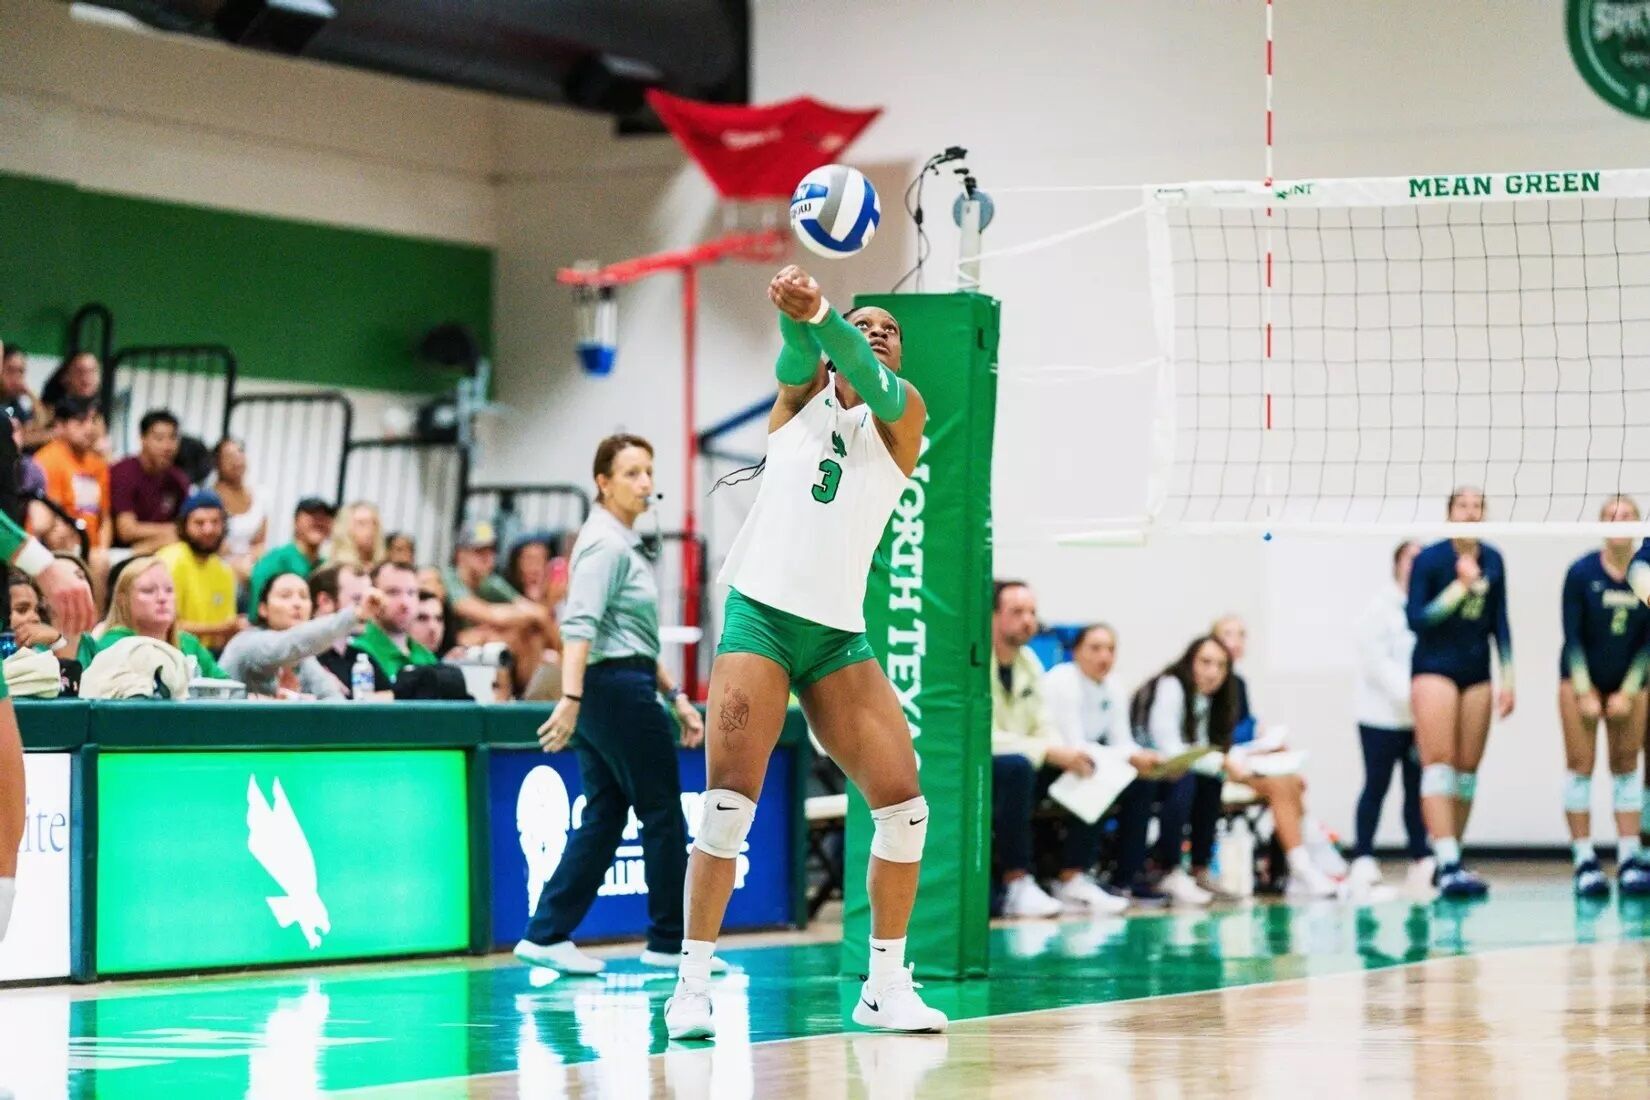 UNT volleyball team looking to build on record start in conference play this week Mean Green dentonrc